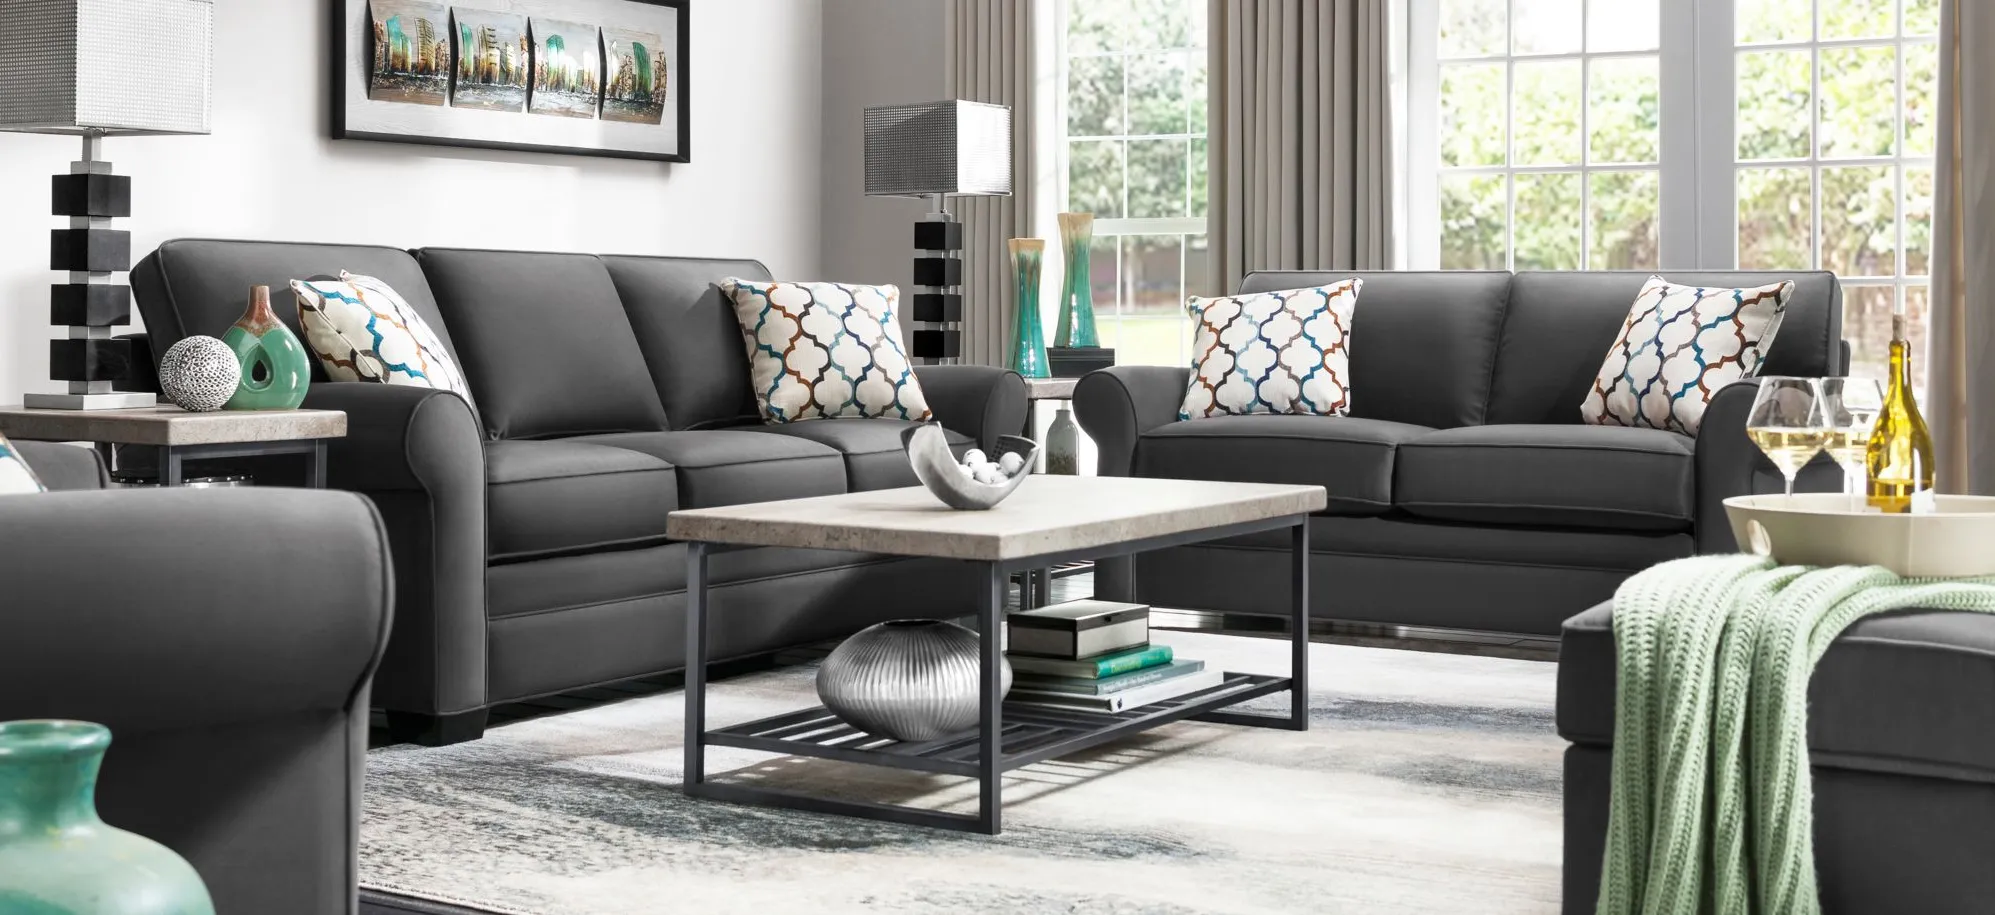 Glendora 2-pc. Microfiber Sofa and Loveseat Set in Suede So Soft Slate by H.M. Richards